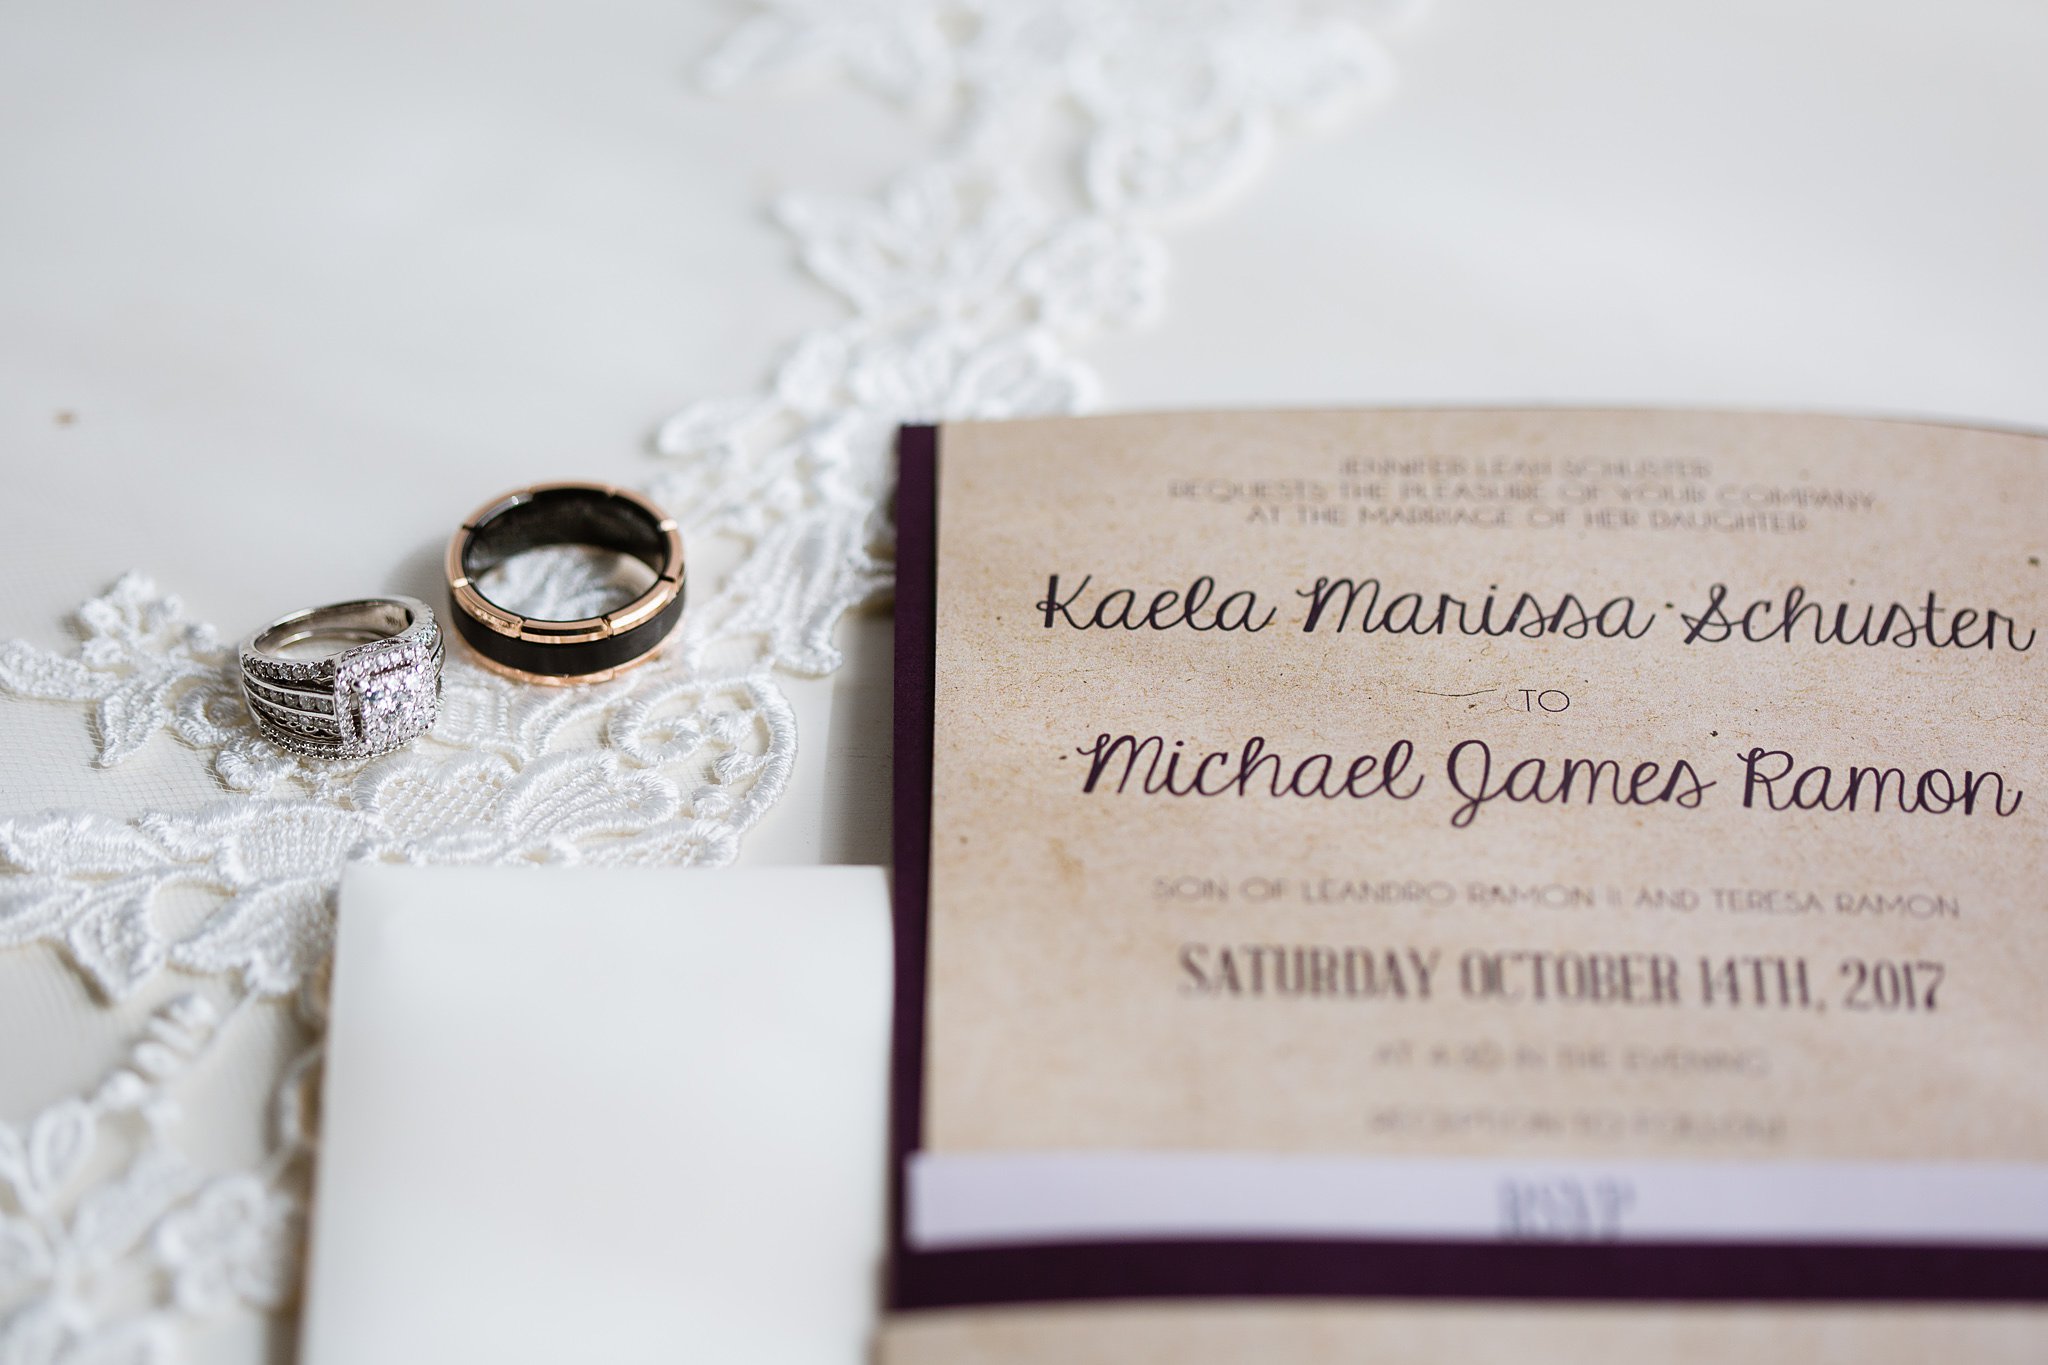 Image of rustic purple wedding invitations next to bride and groom's rings wedding details by Phoenix wedding photographer PMA Photography.